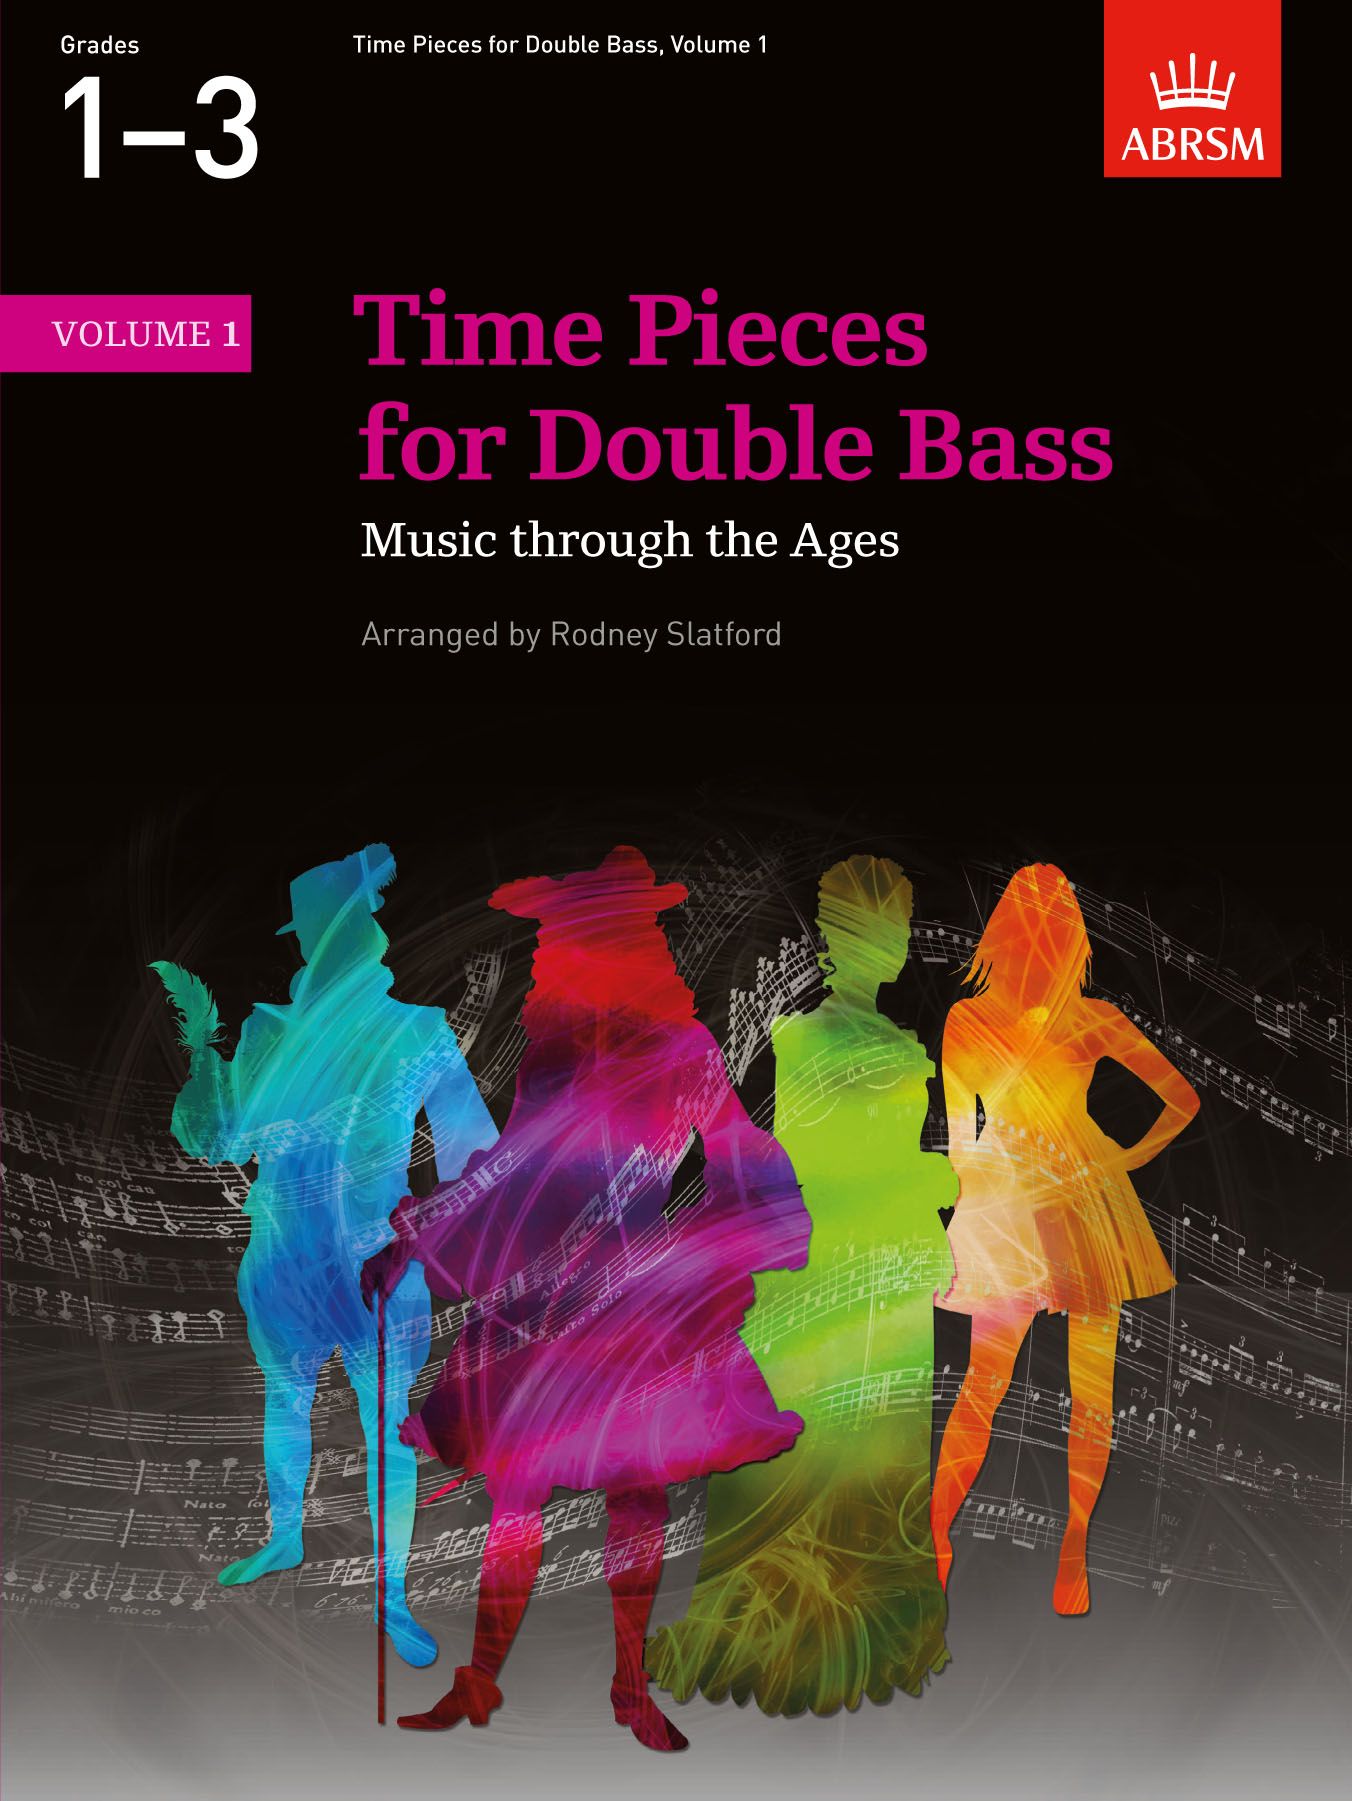 Time Pieces for Double Bass Volume 1 G1-3